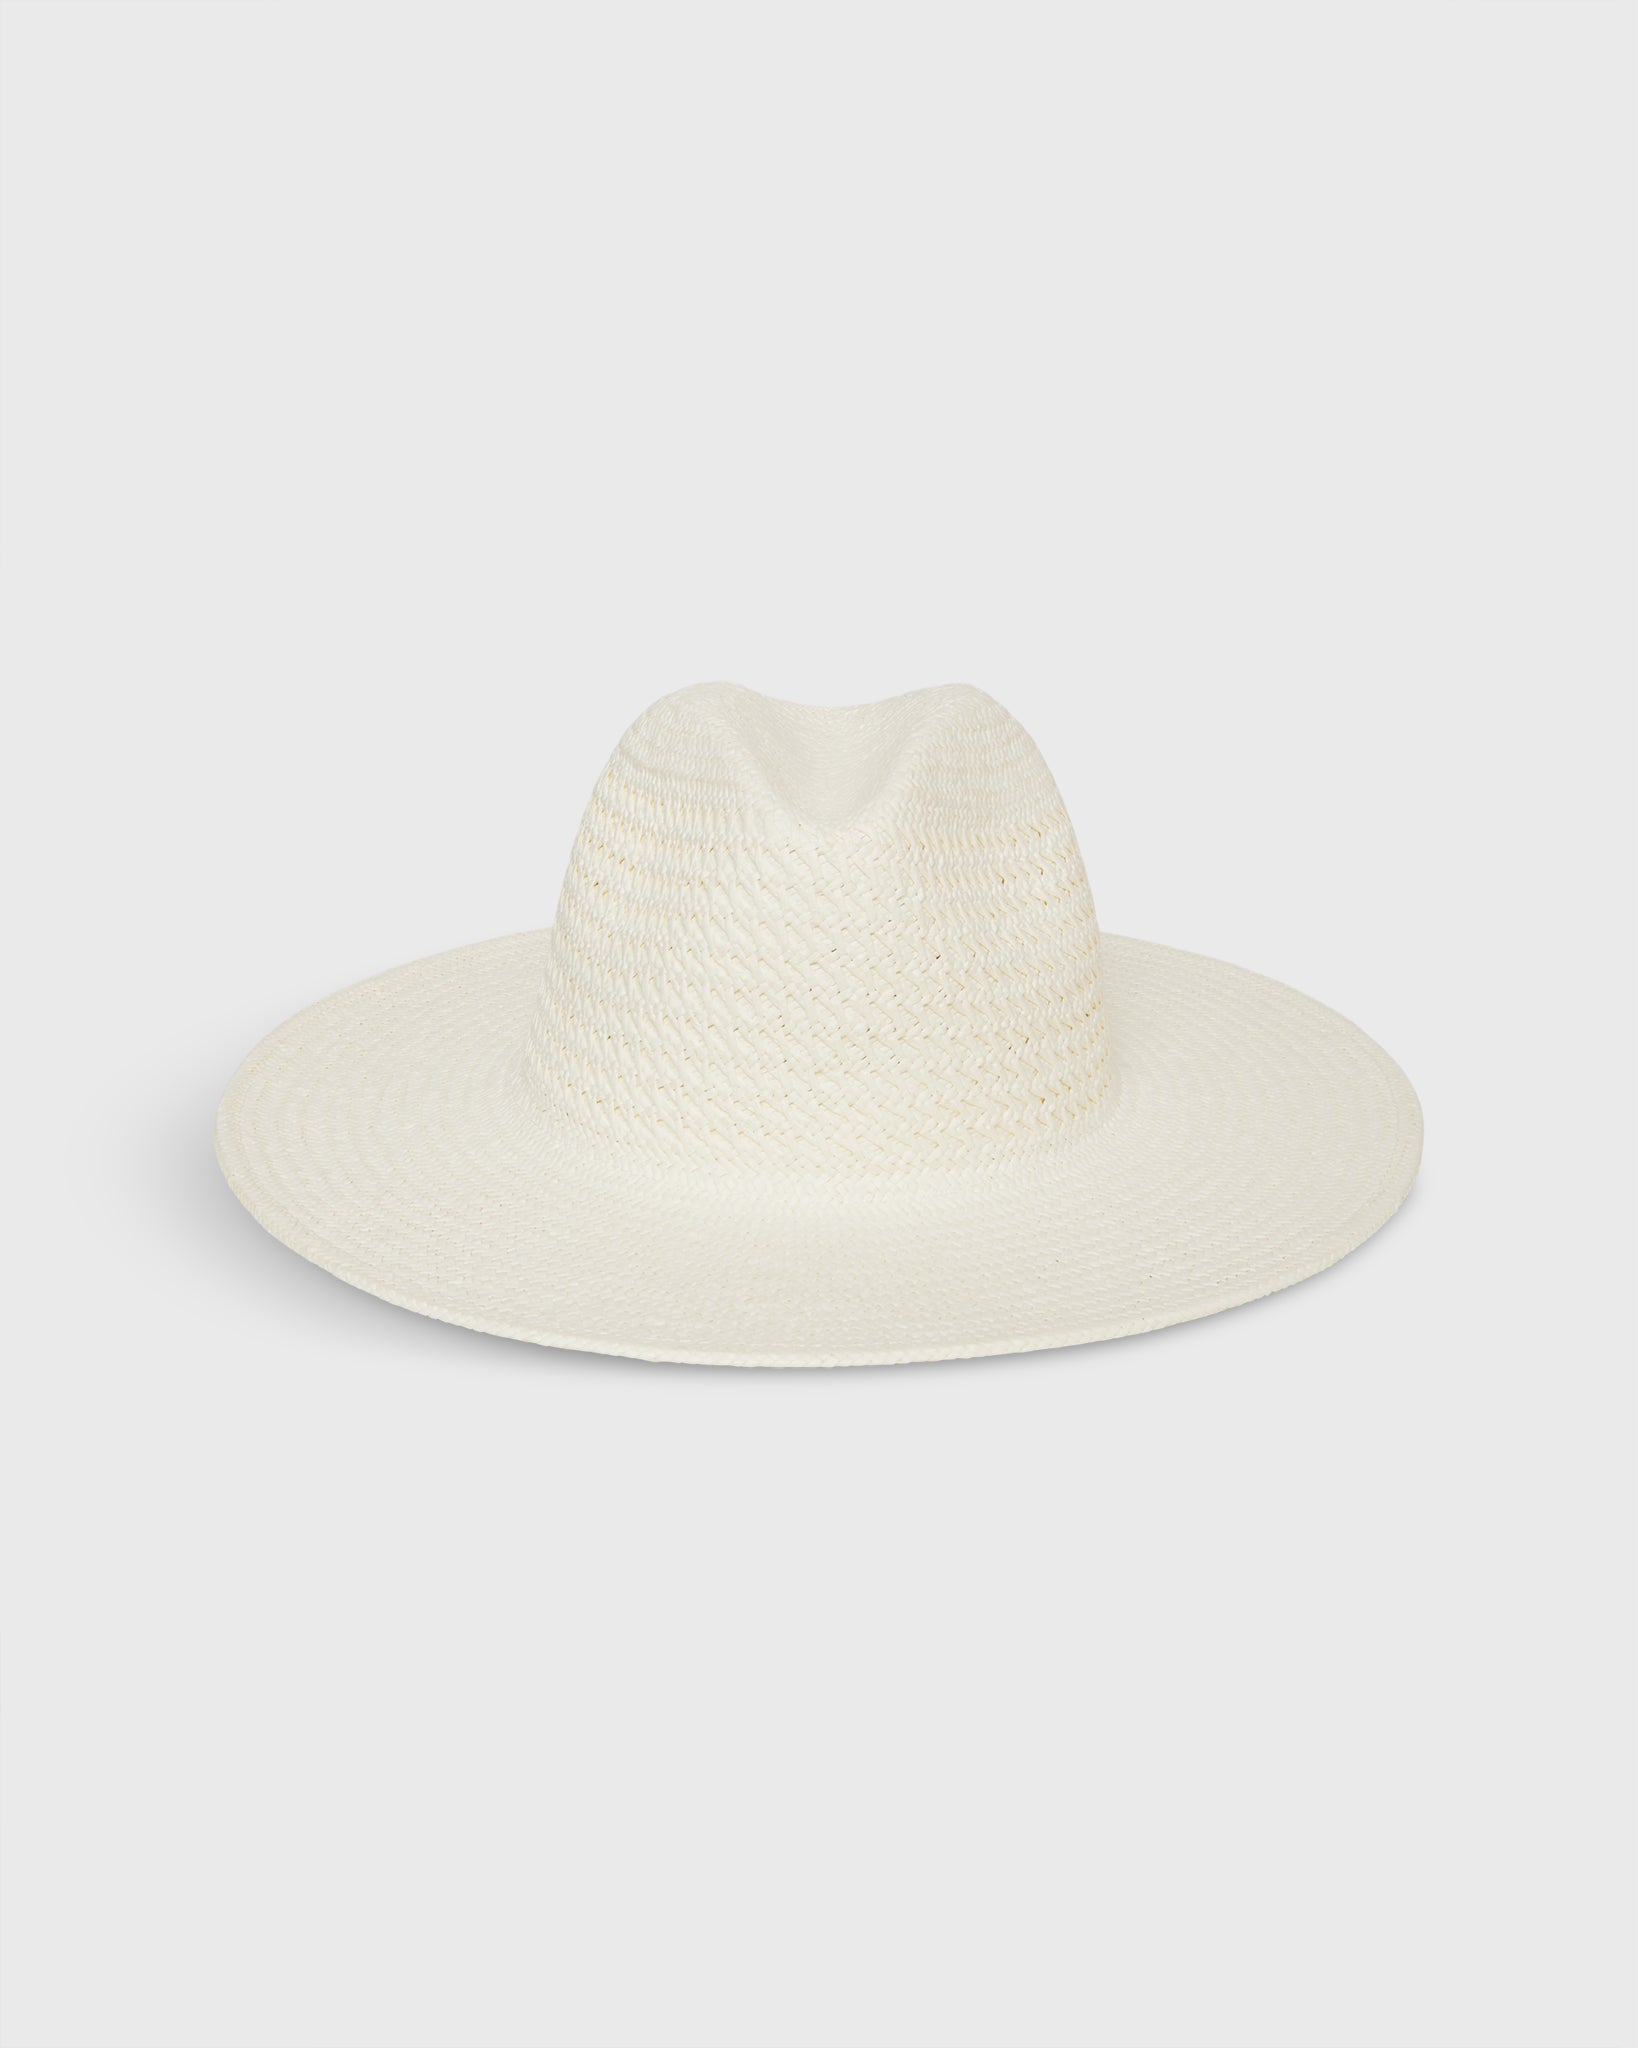 Luxe Vented Packable Hat in Bleach by Hat Attack